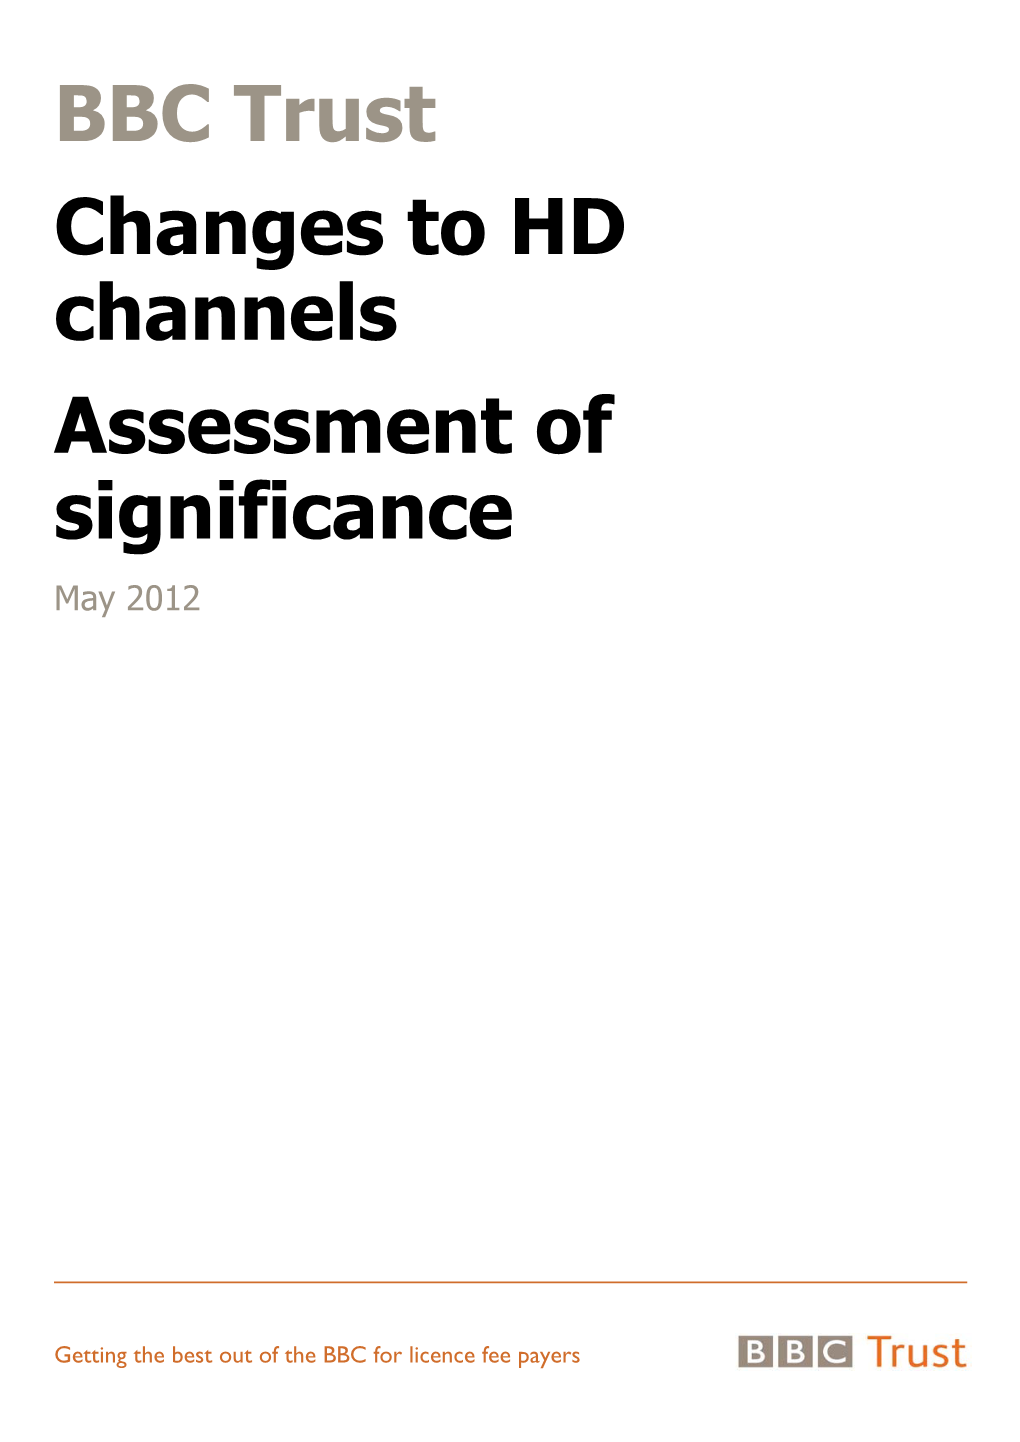 BBC Trust Changes to HD Channels Assessment of Significance May 2012